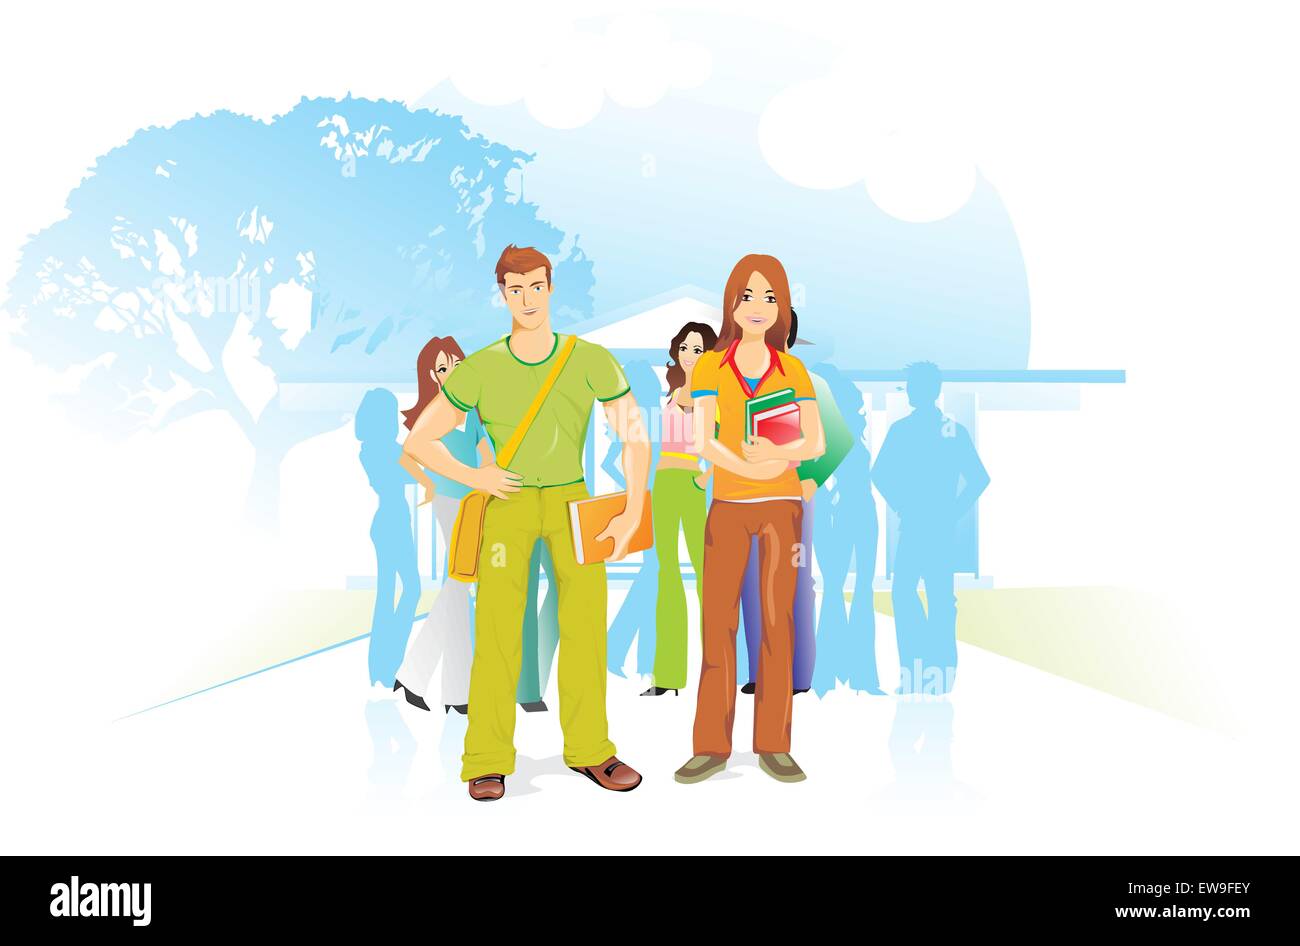 People for the environment, vector illustration Stock Vector